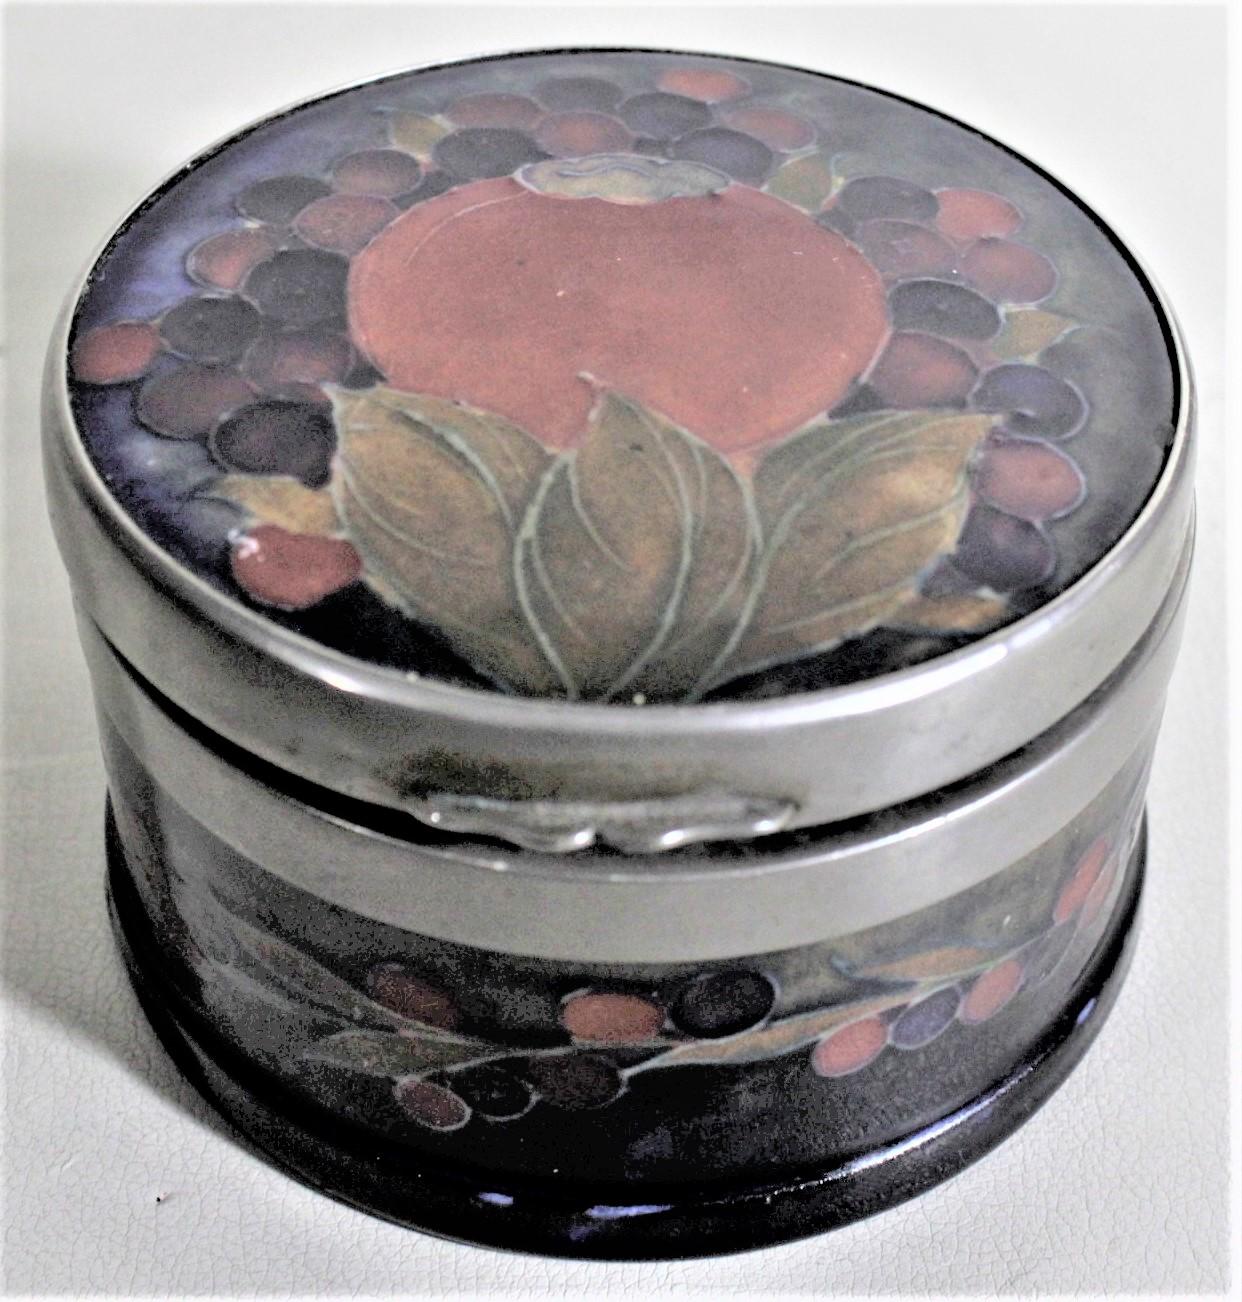 This art pottery dresser jar or box was made by the Moorcroft Pottery company of England in circa 1935 and done in their pomegranate glaze pattern. This circular jar has a hinged lid with a metal mounts and is clearly signed on the base with